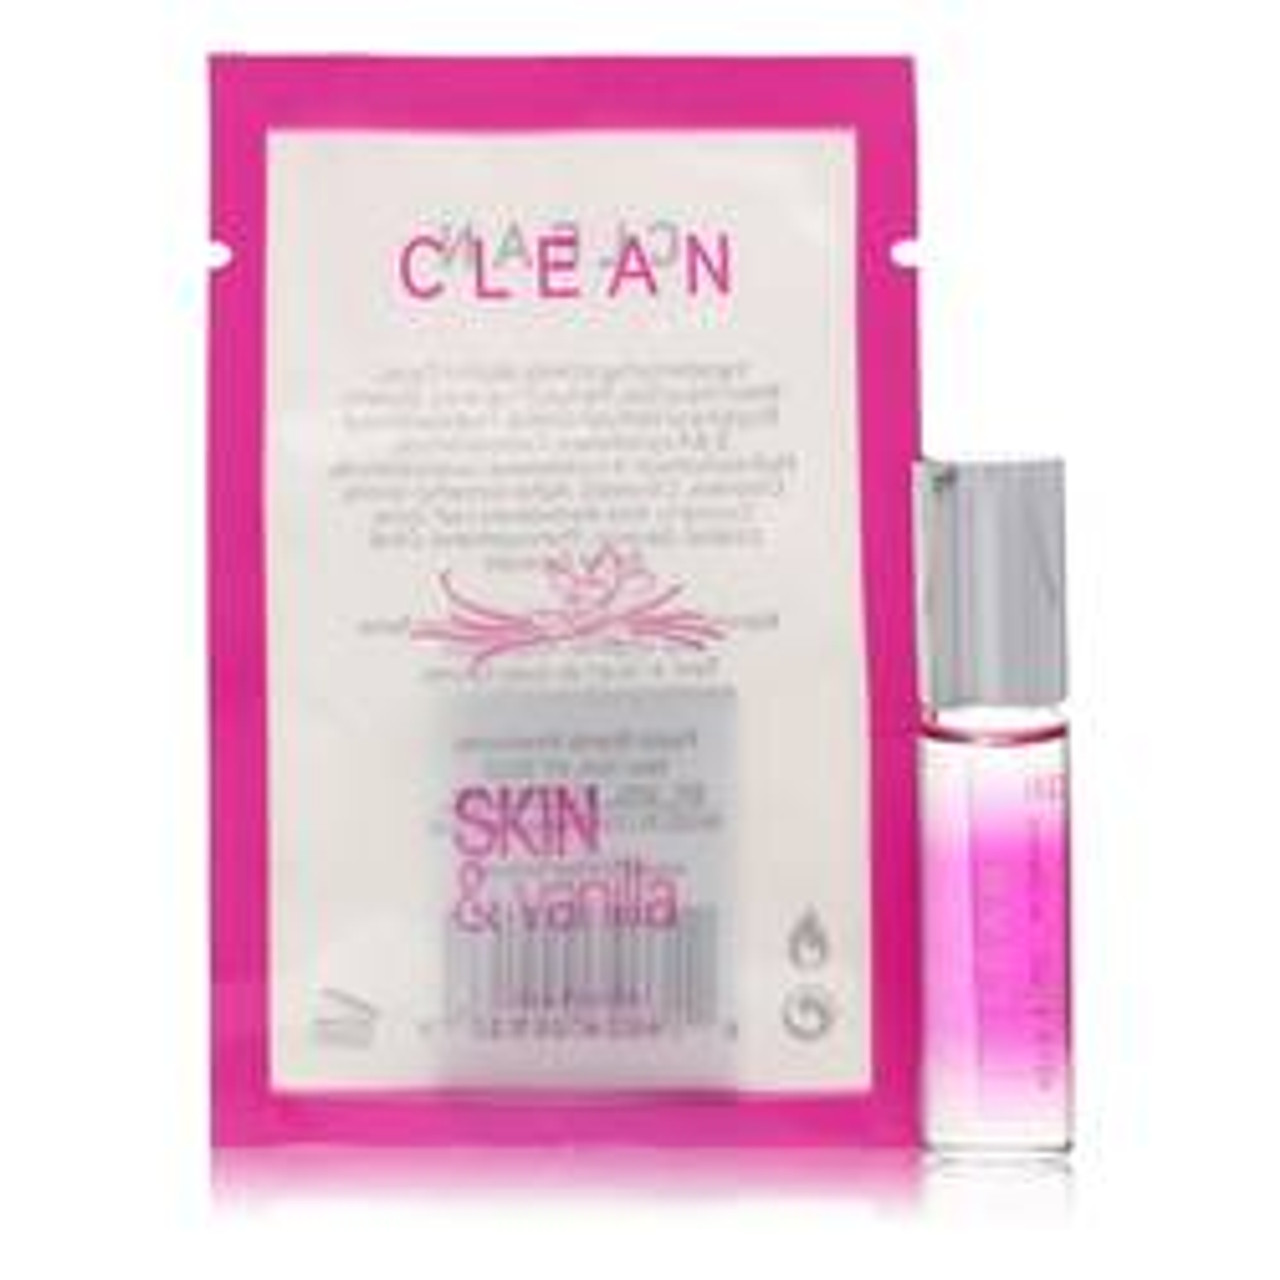 Clean Skin And Vanilla Perfume By Clean Mini Eau Frachie 0.17 oz for Women - [From 23.00 - Choose pk Qty ] - *Ships from Miami